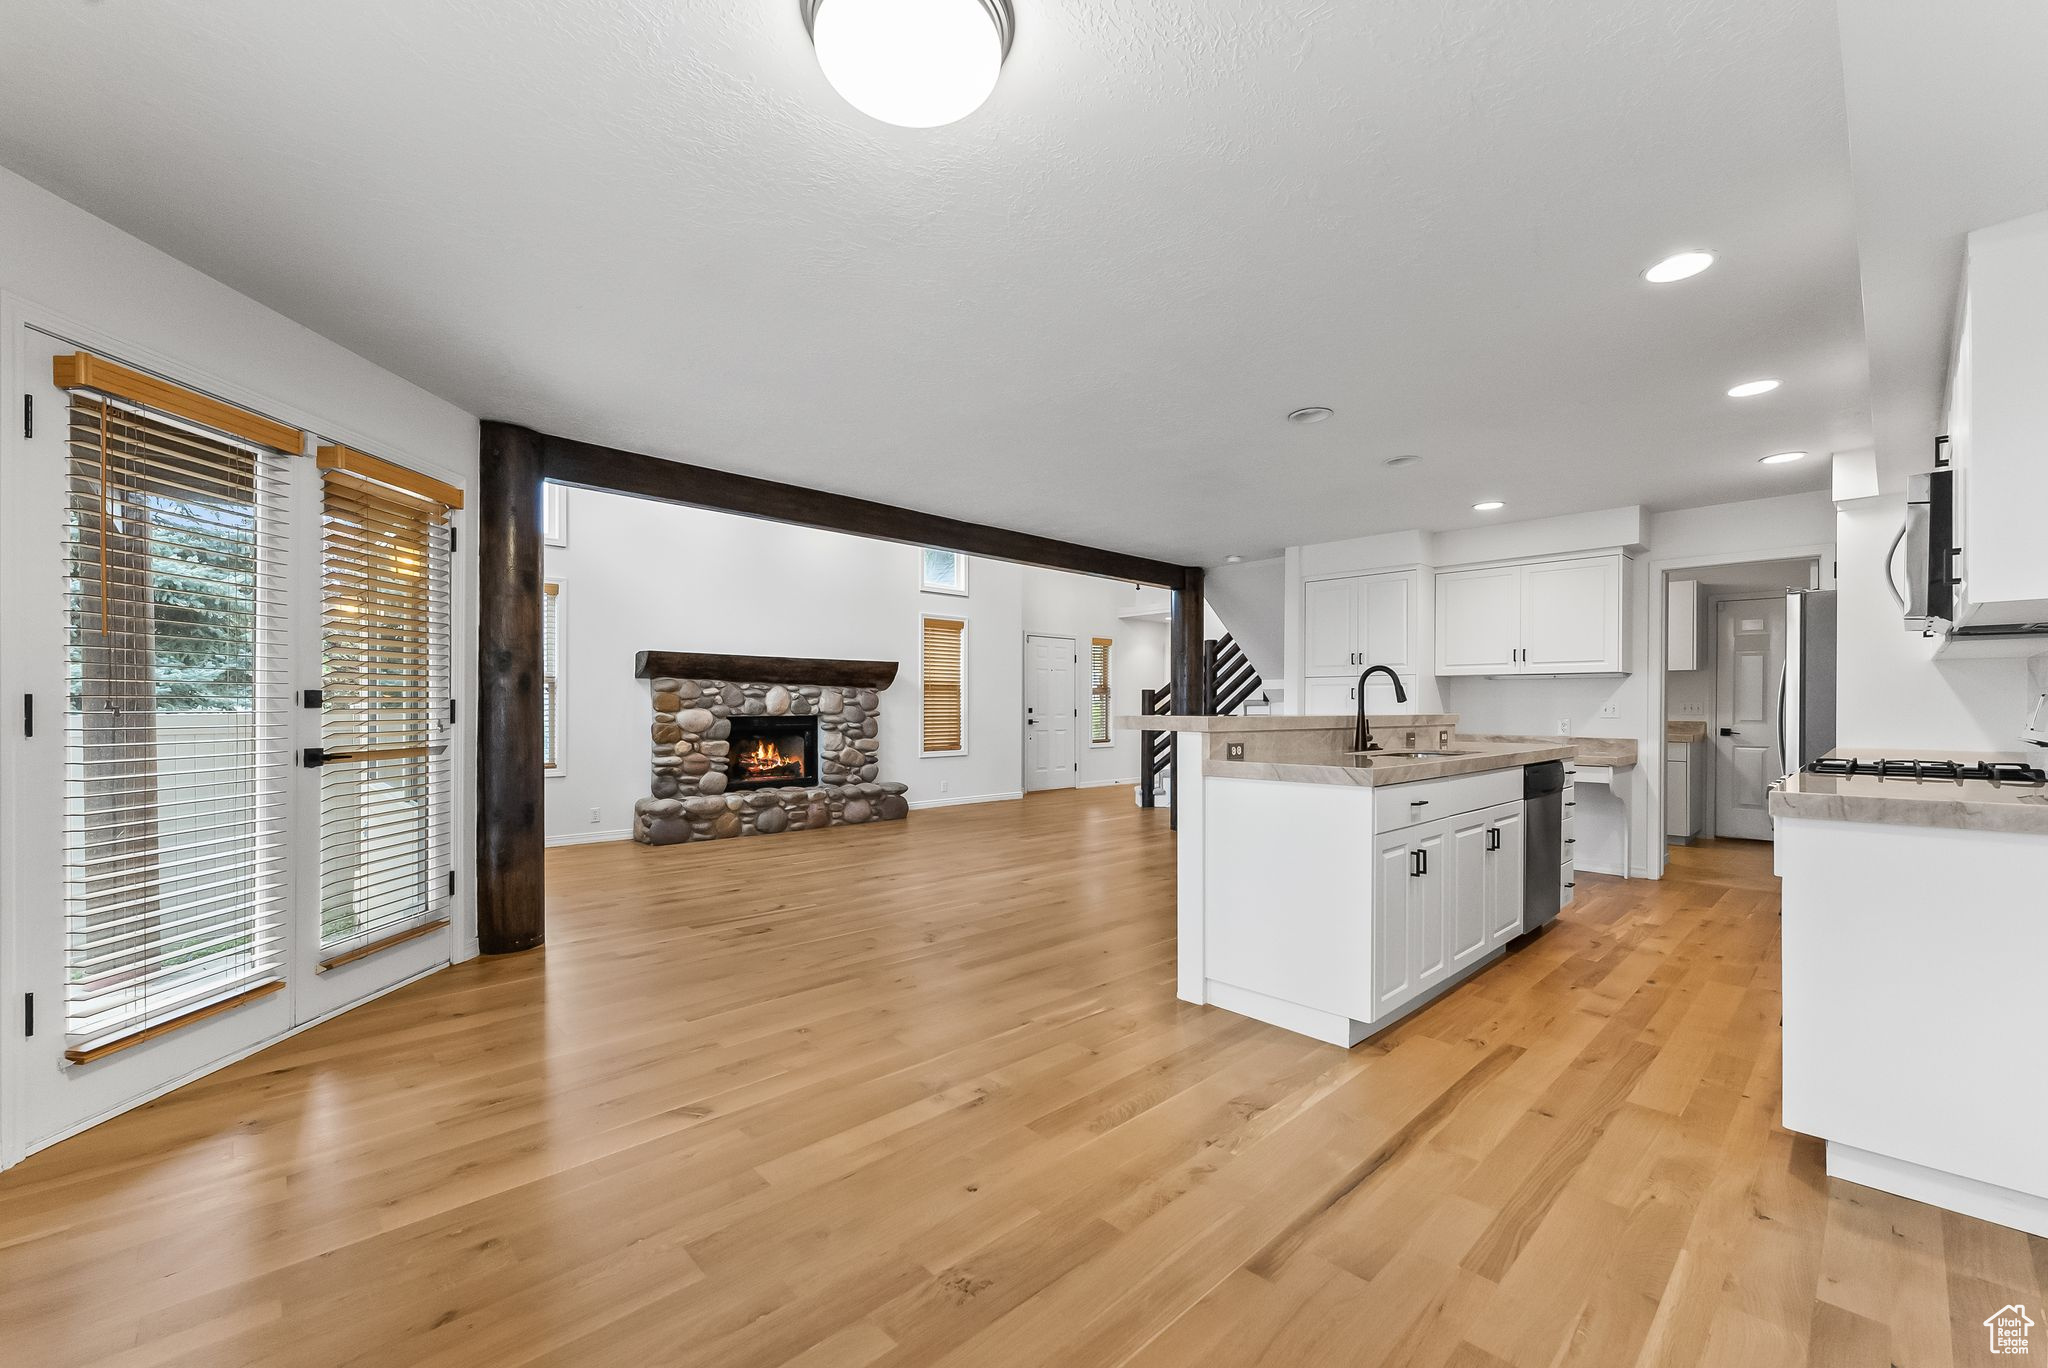 Kitchen with white cabinets, Stainless steel appliances, and light wood-type flooring